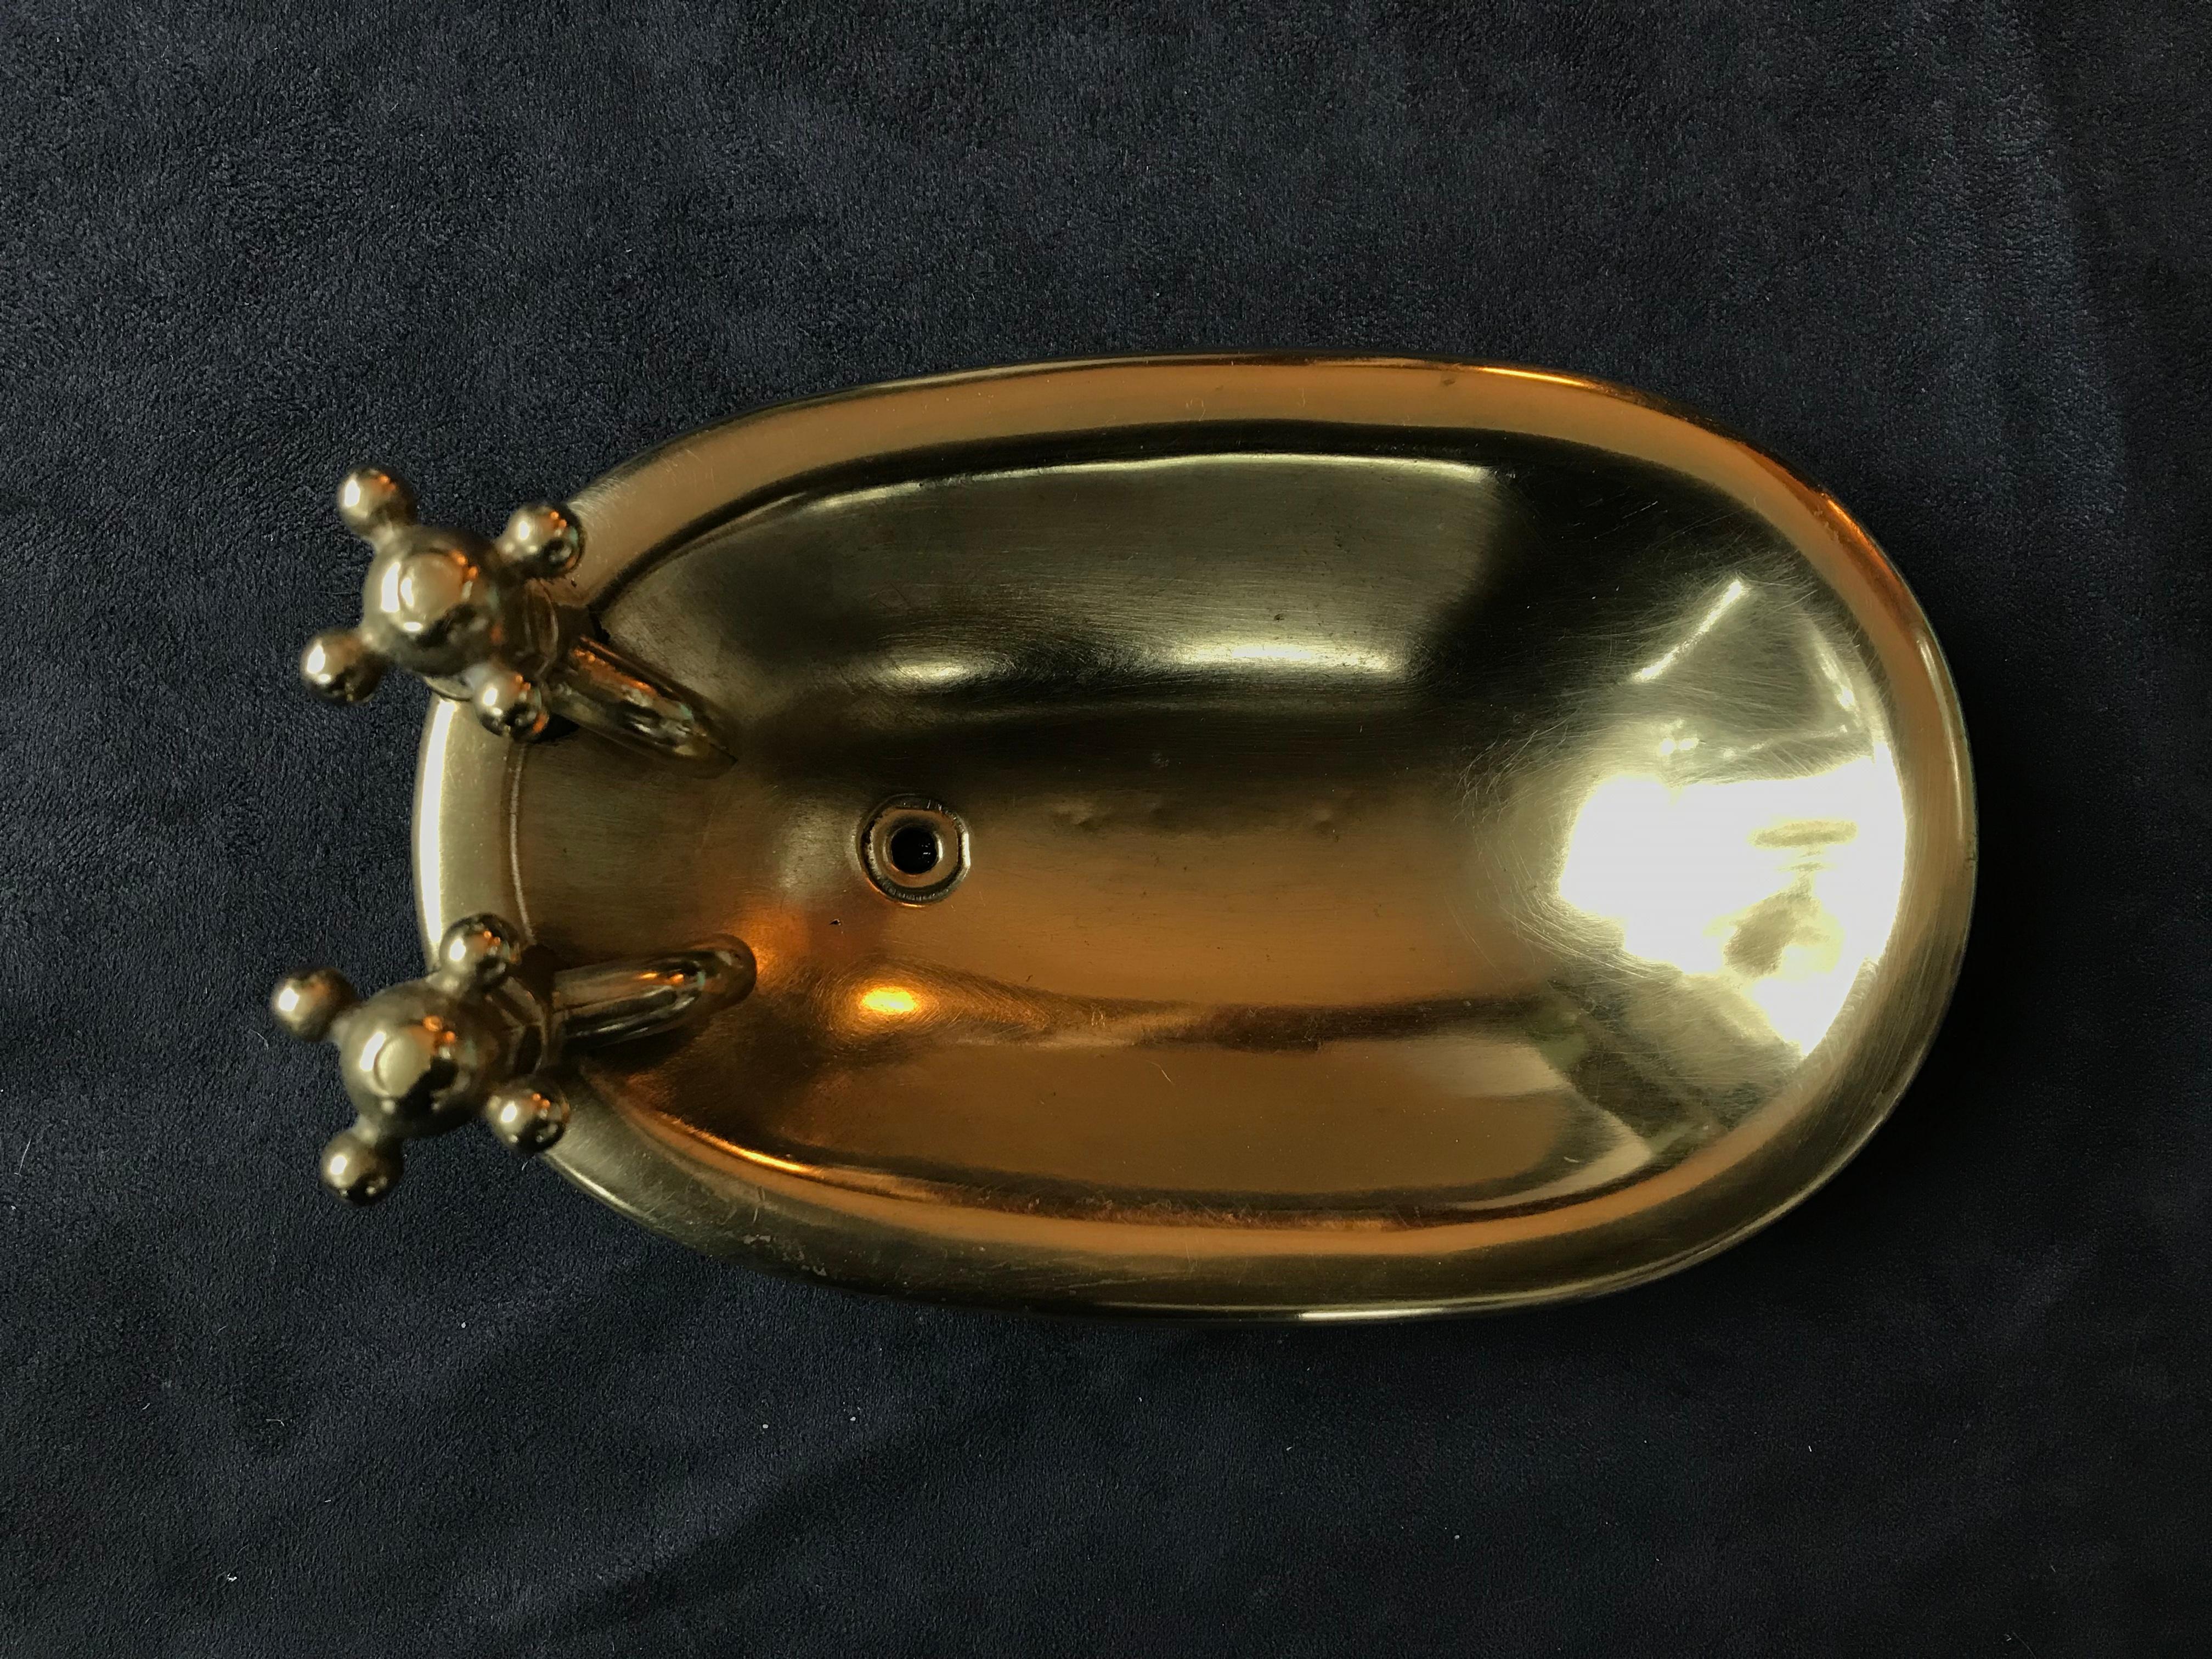 Elegant gilt bronze soap holder in a bathtub style, France 1940.
Excellent condition and quality.